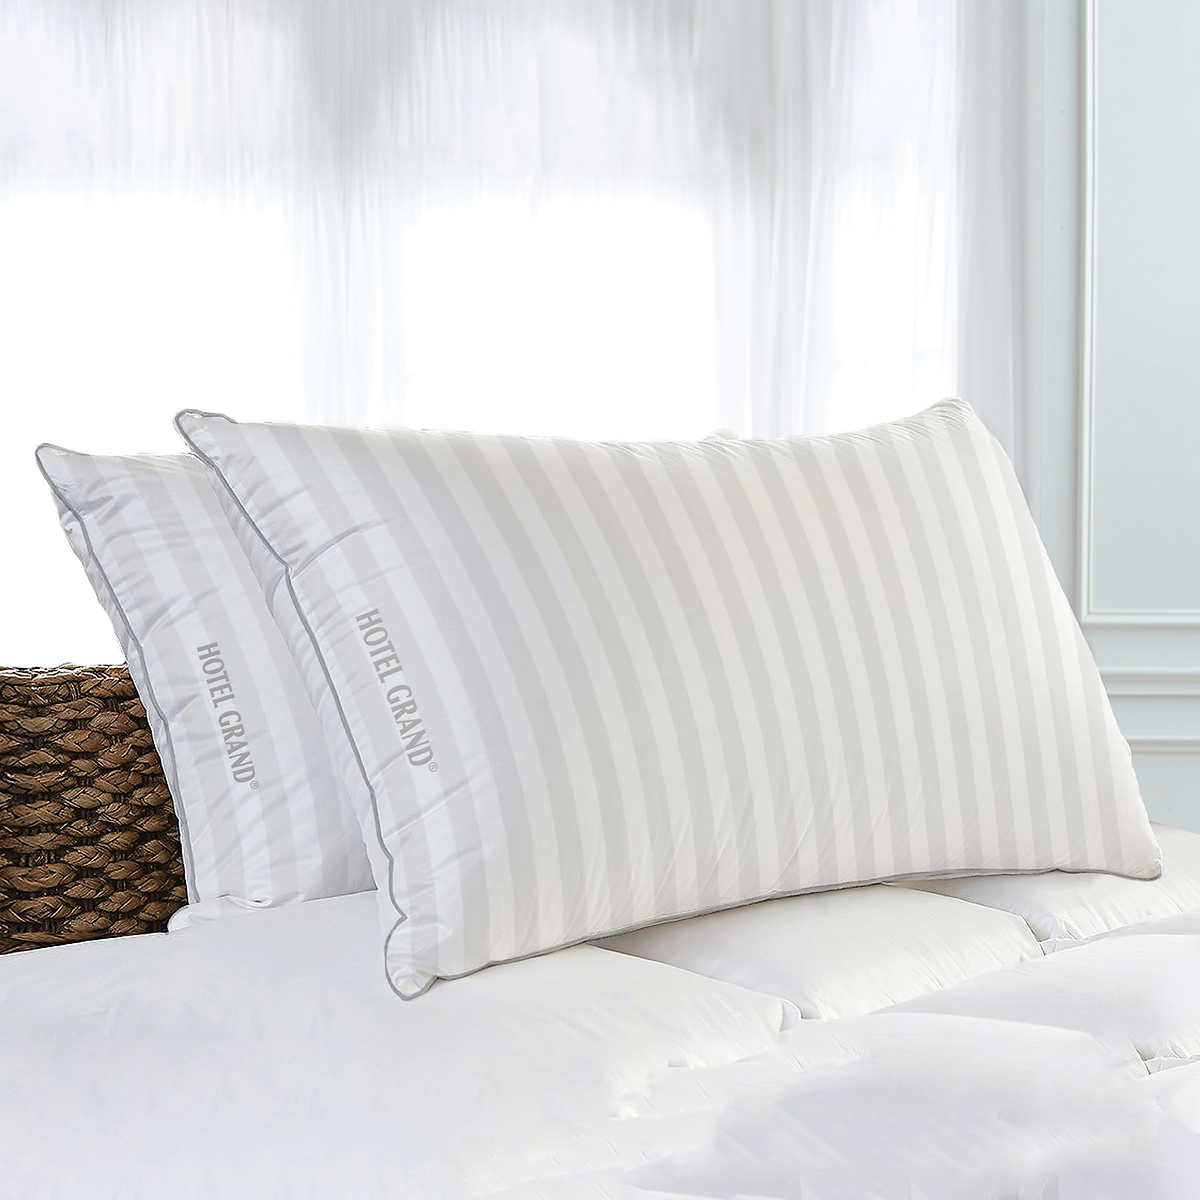 Duck Feather & Down Standard Pillow Cotton Cover Soft Luxury set Pack of 1,2 & 4 